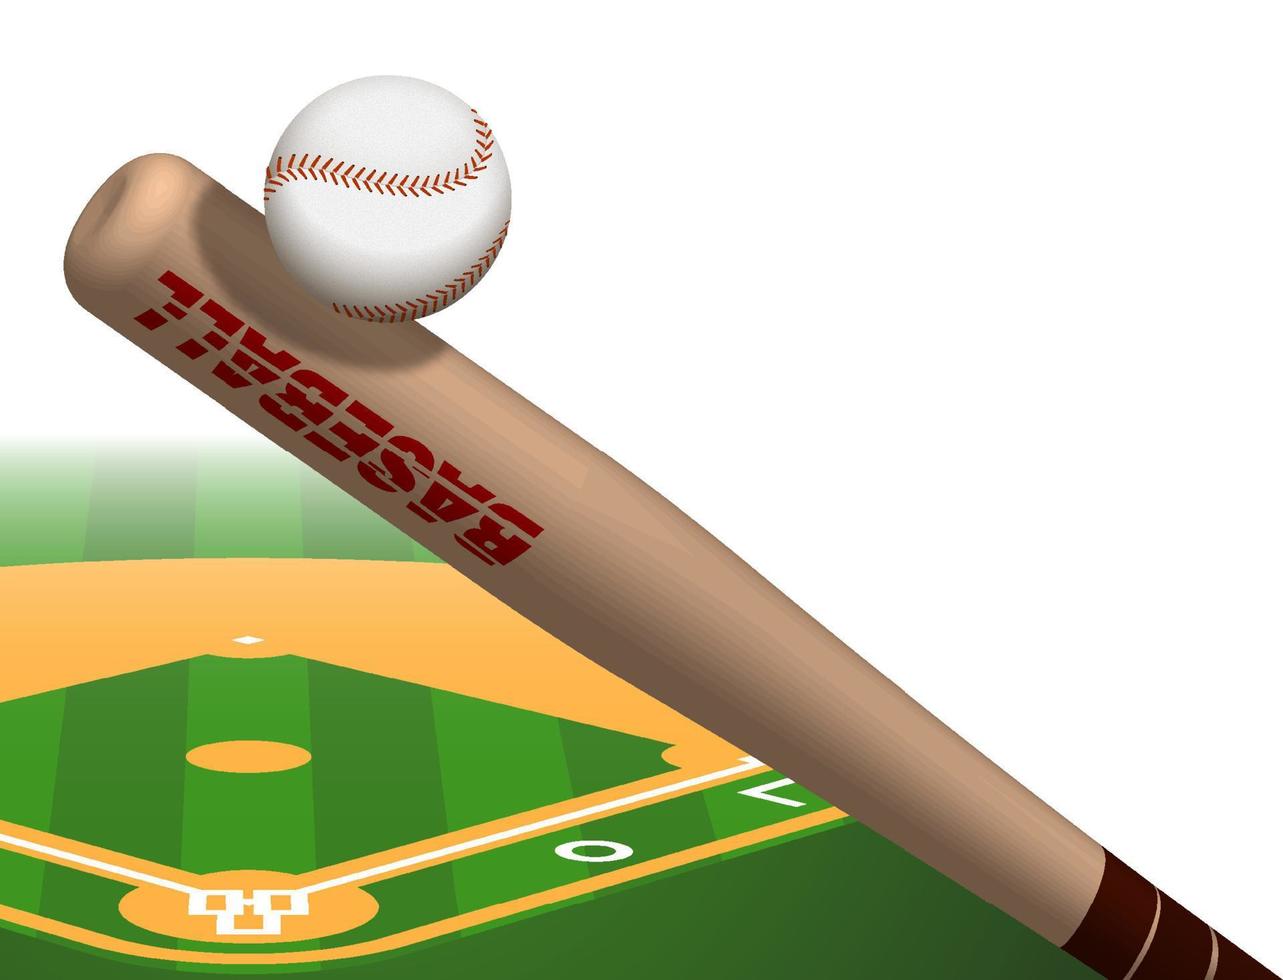 sports wooden baseball bat hits flying ball. American national sport. Active lifestyle. Realistic vector background